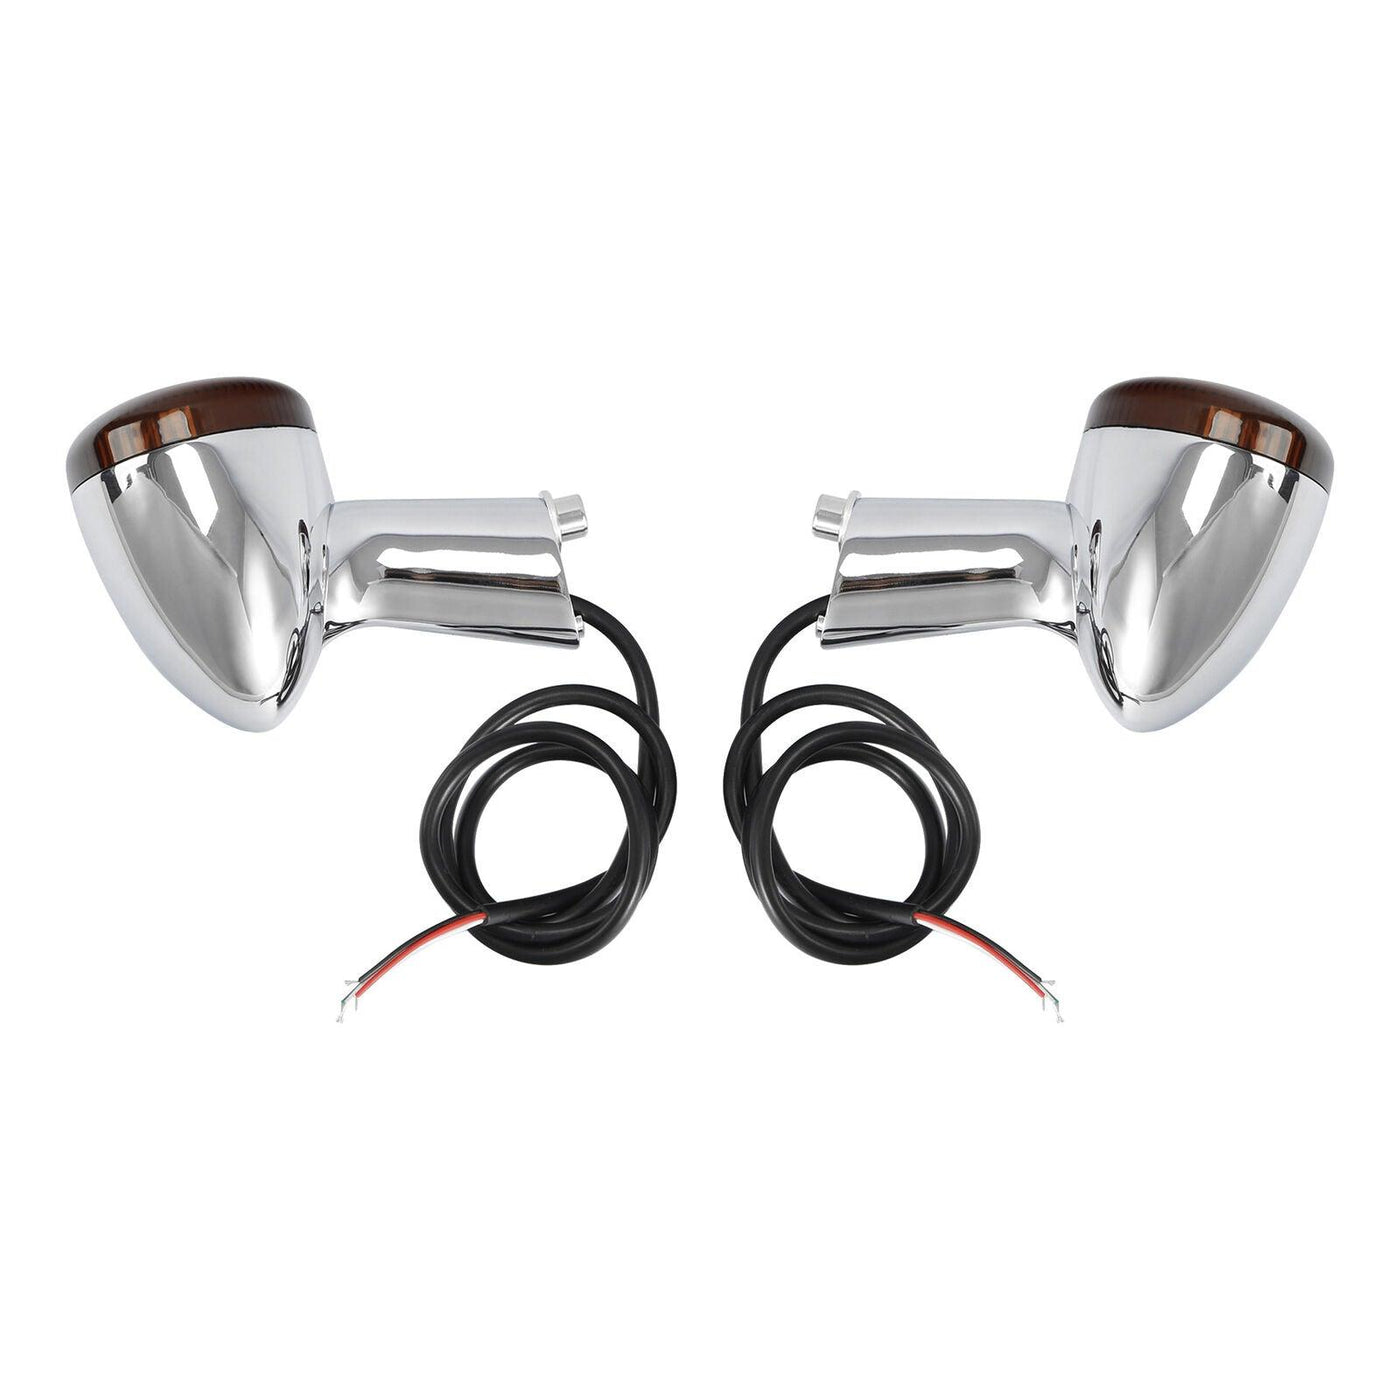 Chrome Rear Turn Signals LED Light Fit For Harley Sportster XL883 XL1200 1992-UP - Moto Life Products